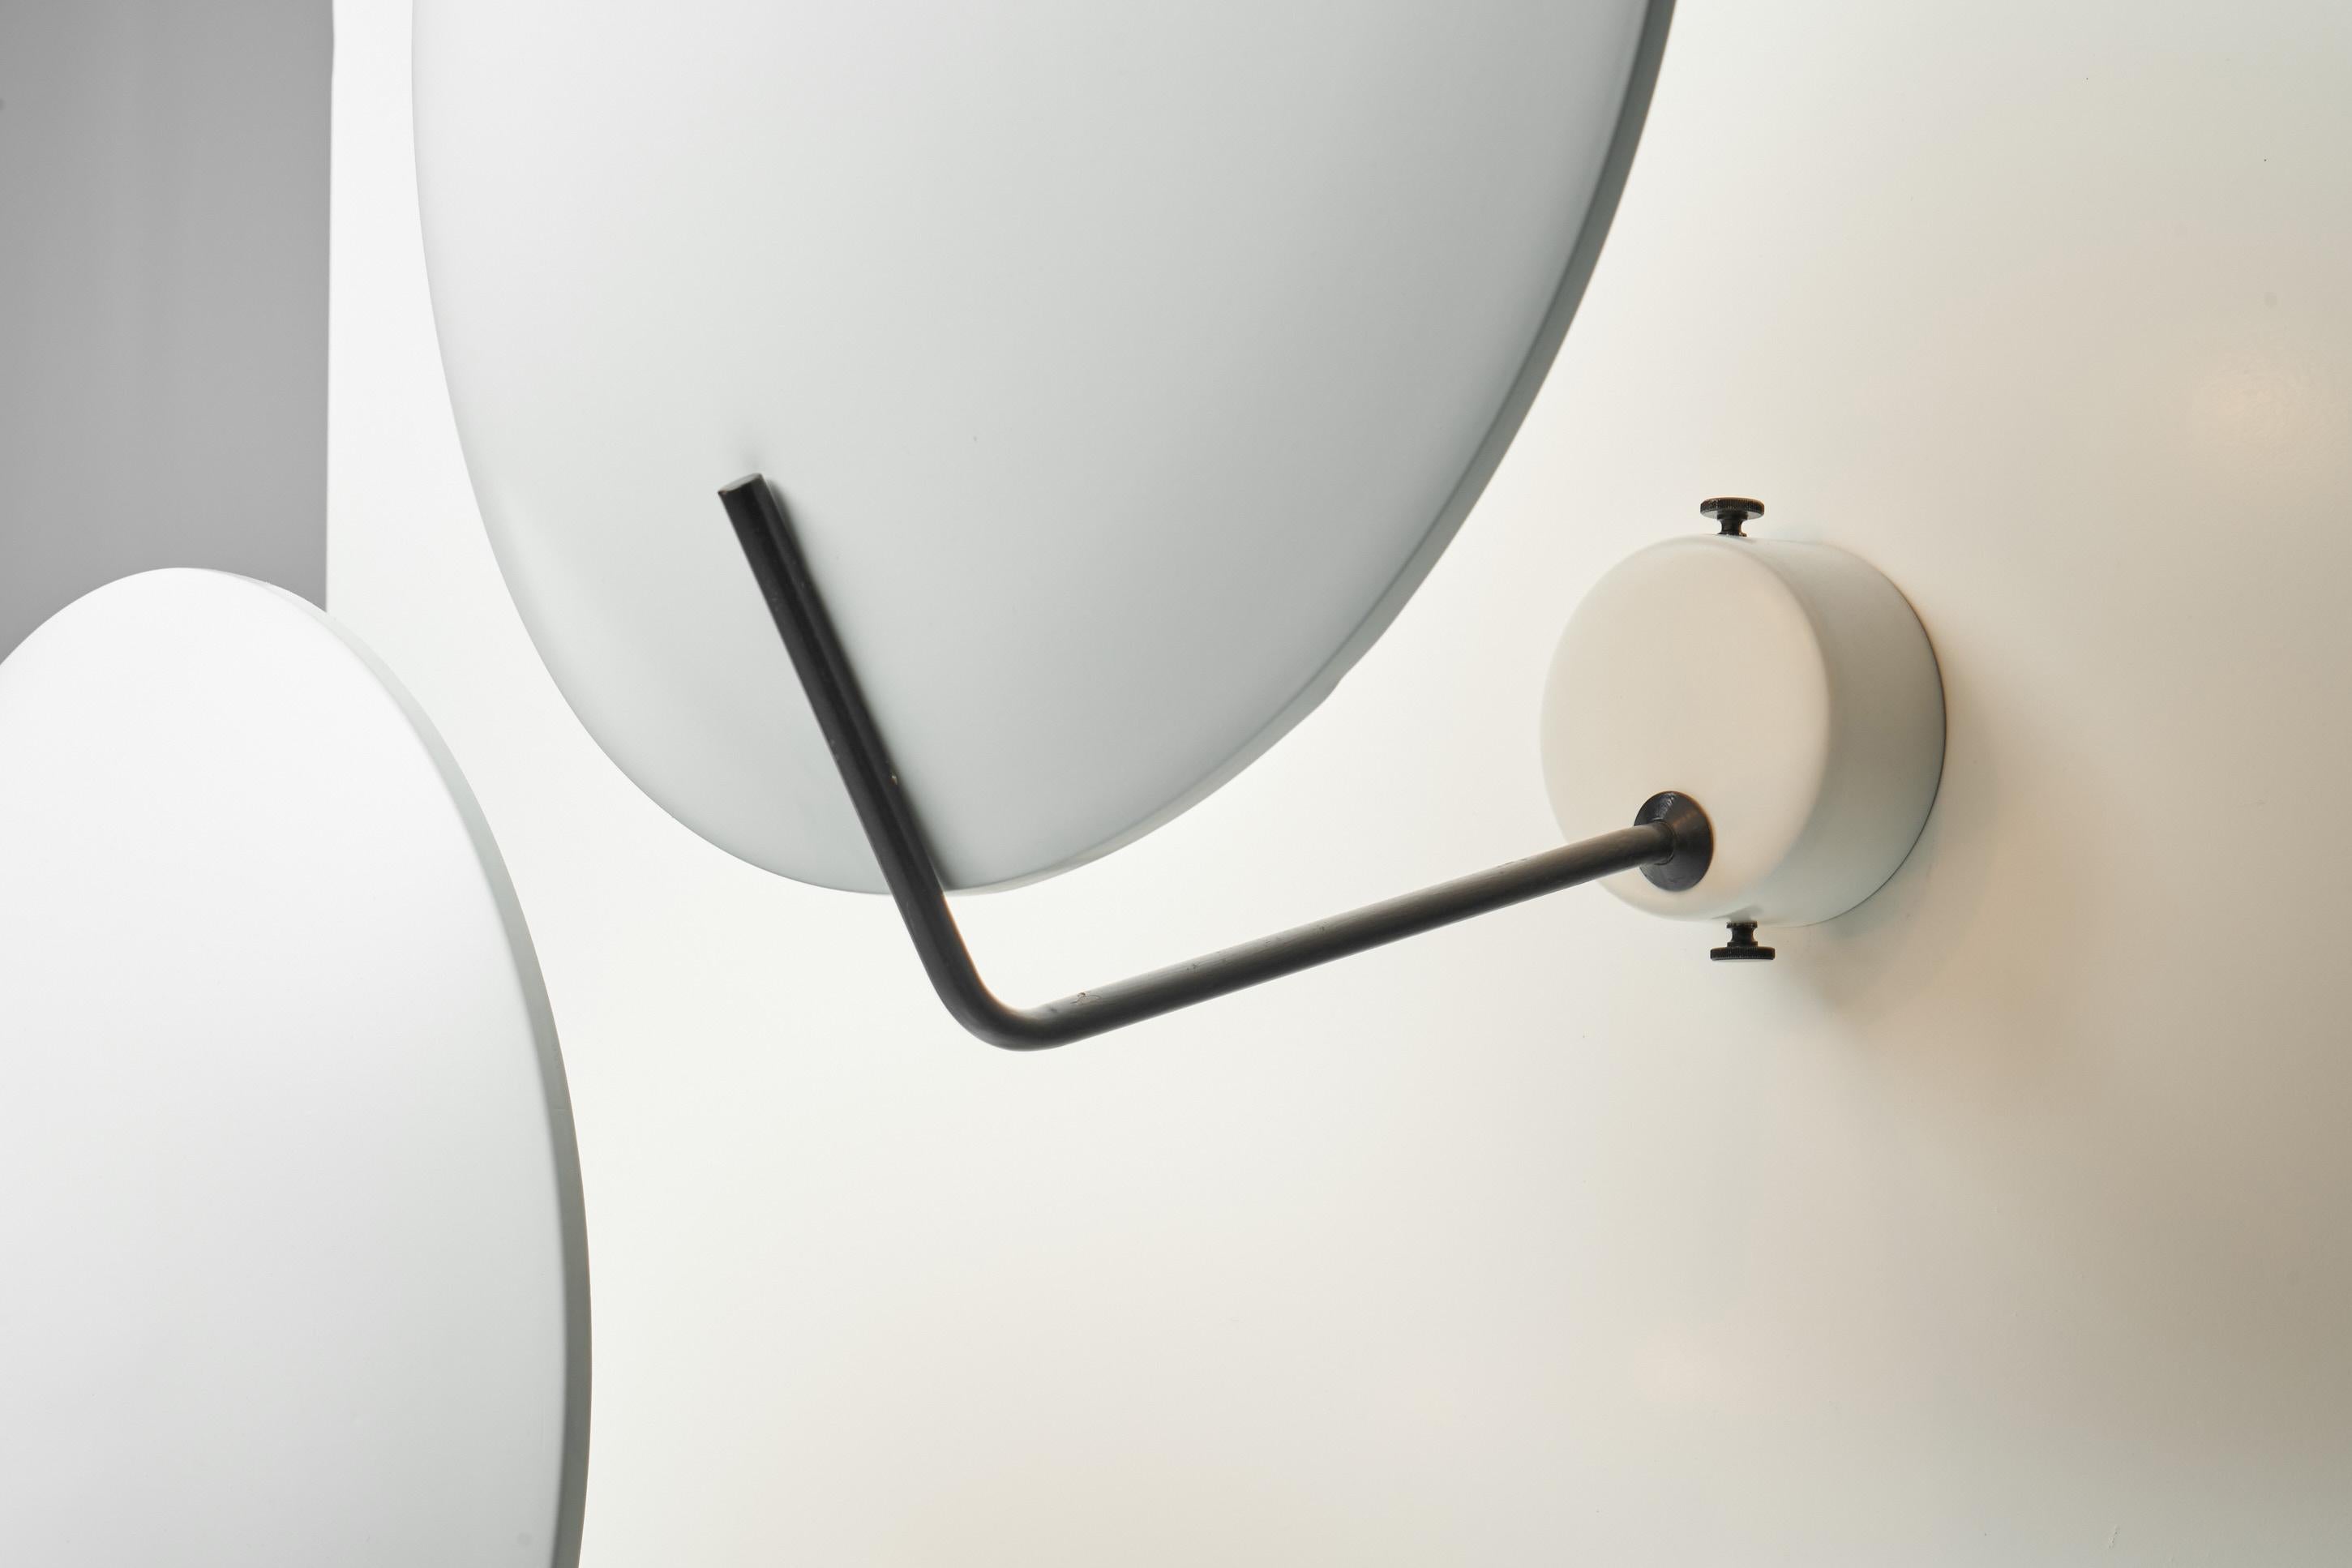 Nice and minimalistic pair of 'Model 232' wall lamps, designed by Bruno Gatta and manufactured by Stilnovo, Italy 1954. The large bowl-shaped shades are supported by a black painted metal arm, the wall mounted cap is the same finish as the shade and